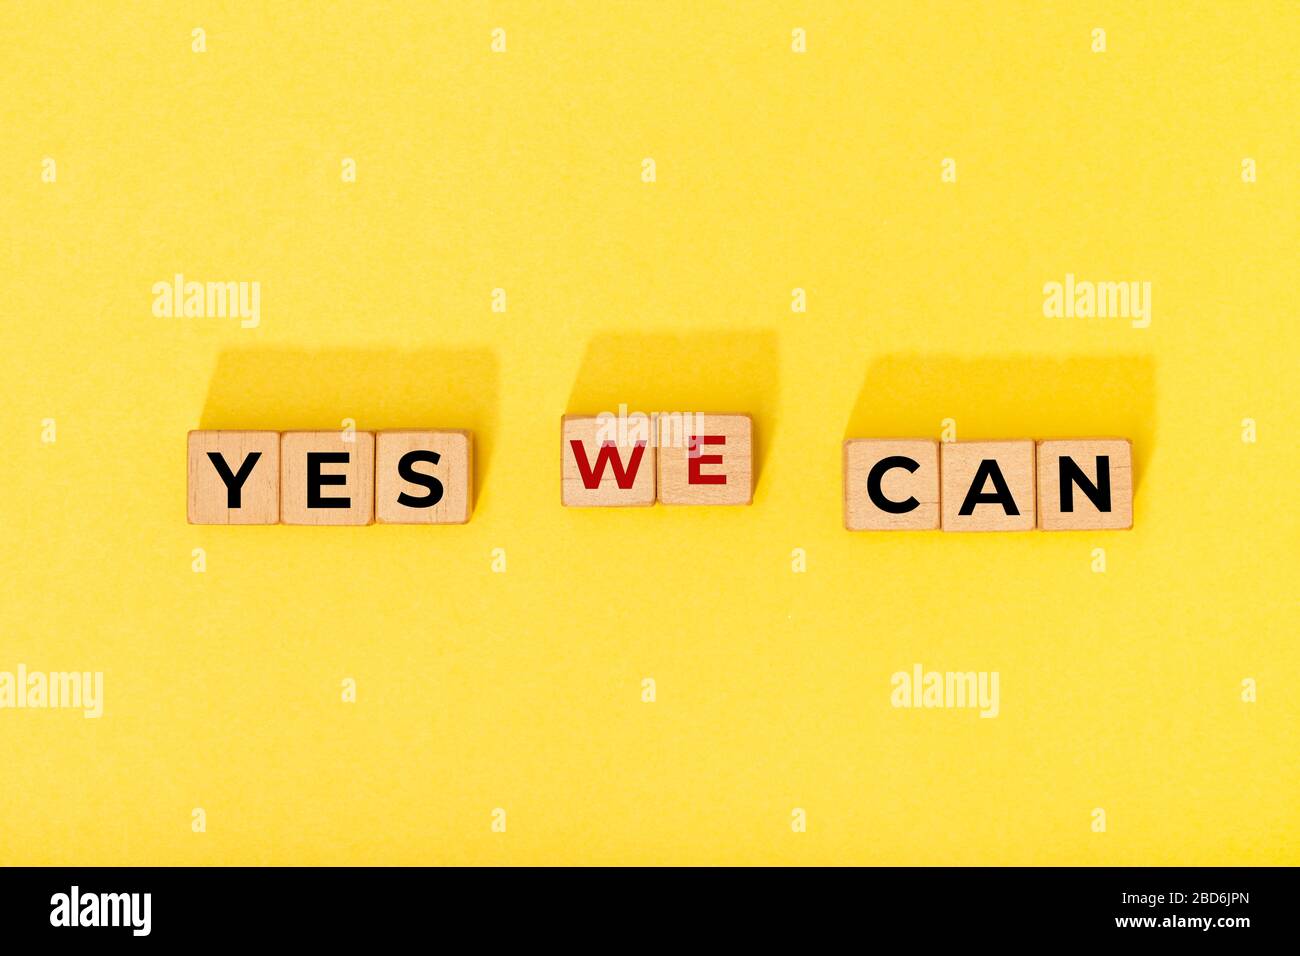 Yes we can message on wooden blocks. Motivational Words Quotes Concept Stock Photo